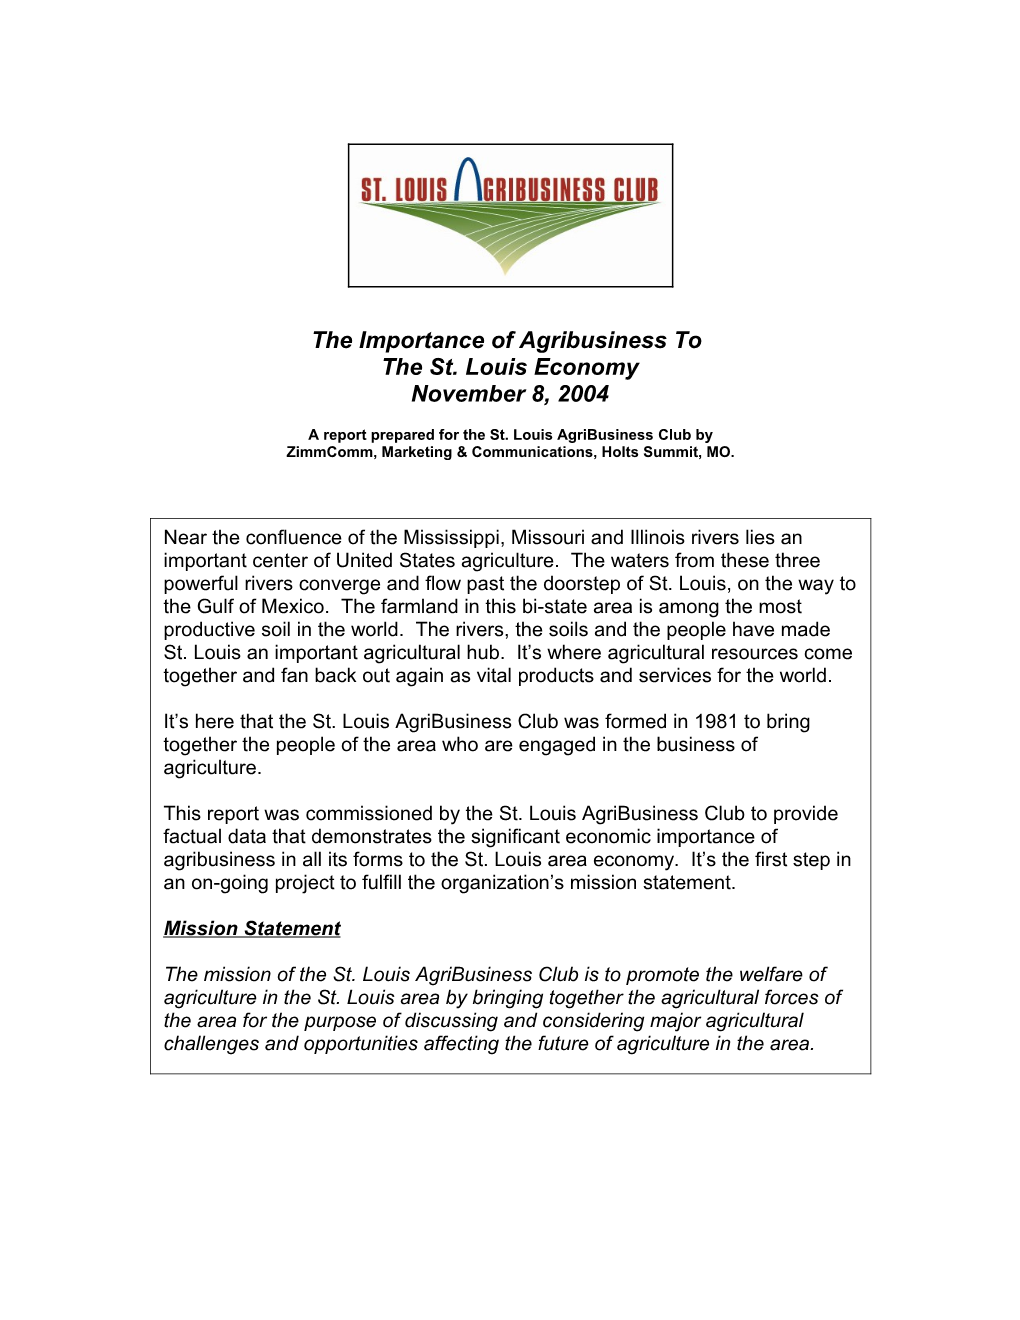 A Report Prepared for the St. Louis Agribusiness Club By